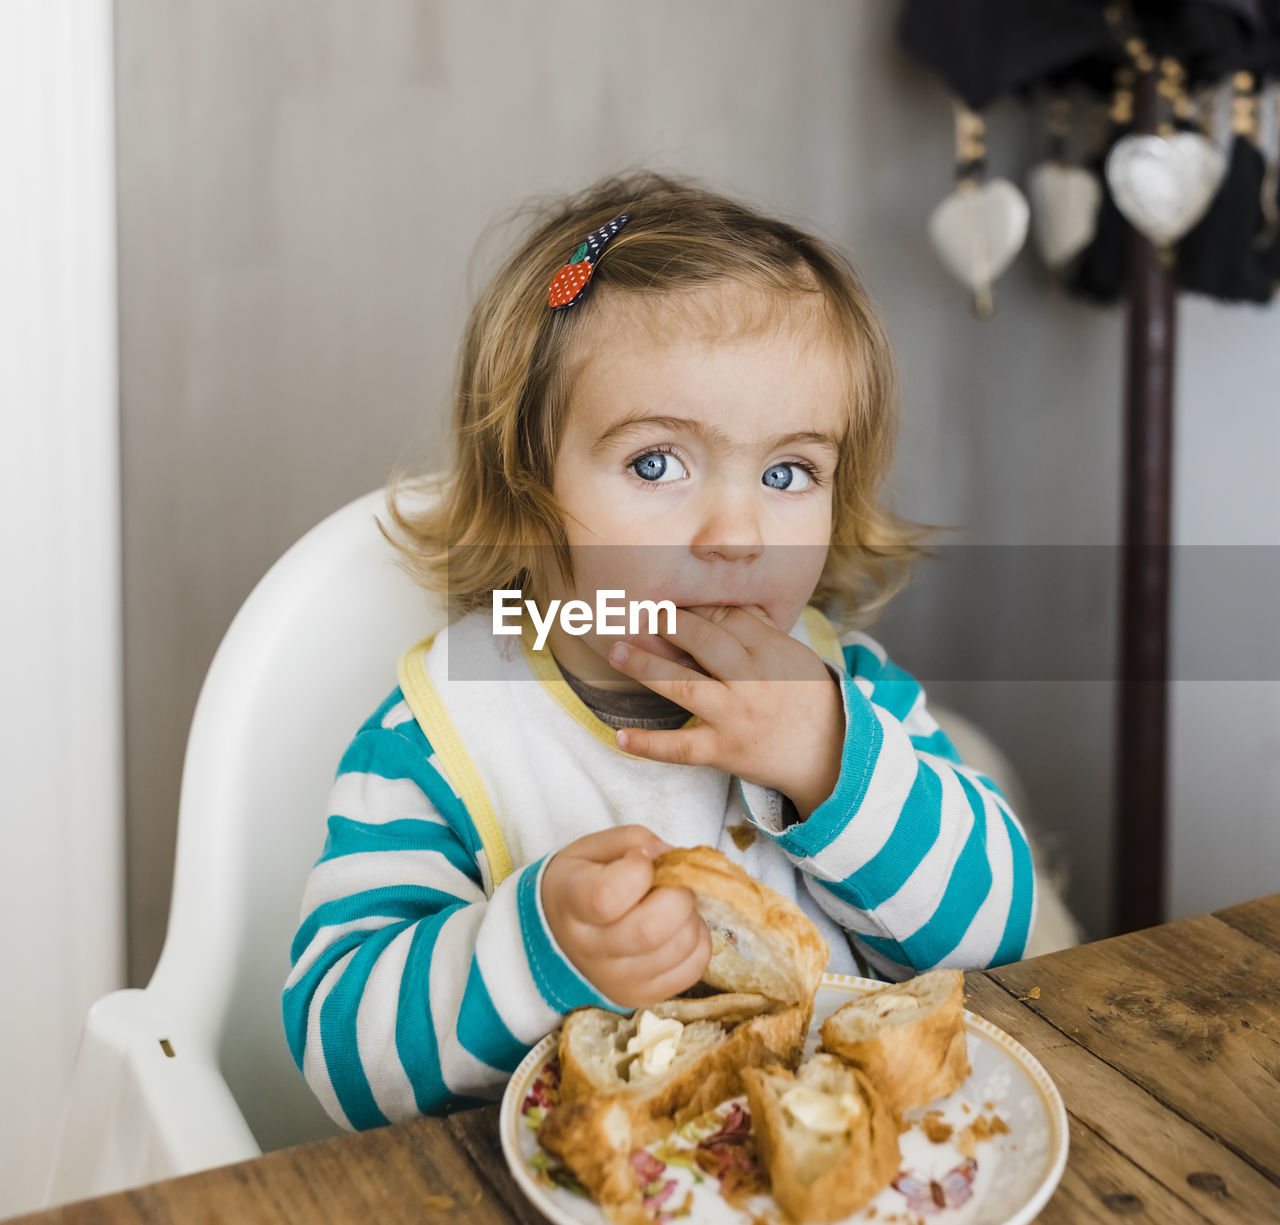 Portrait of baby girl eating food while sitting at table